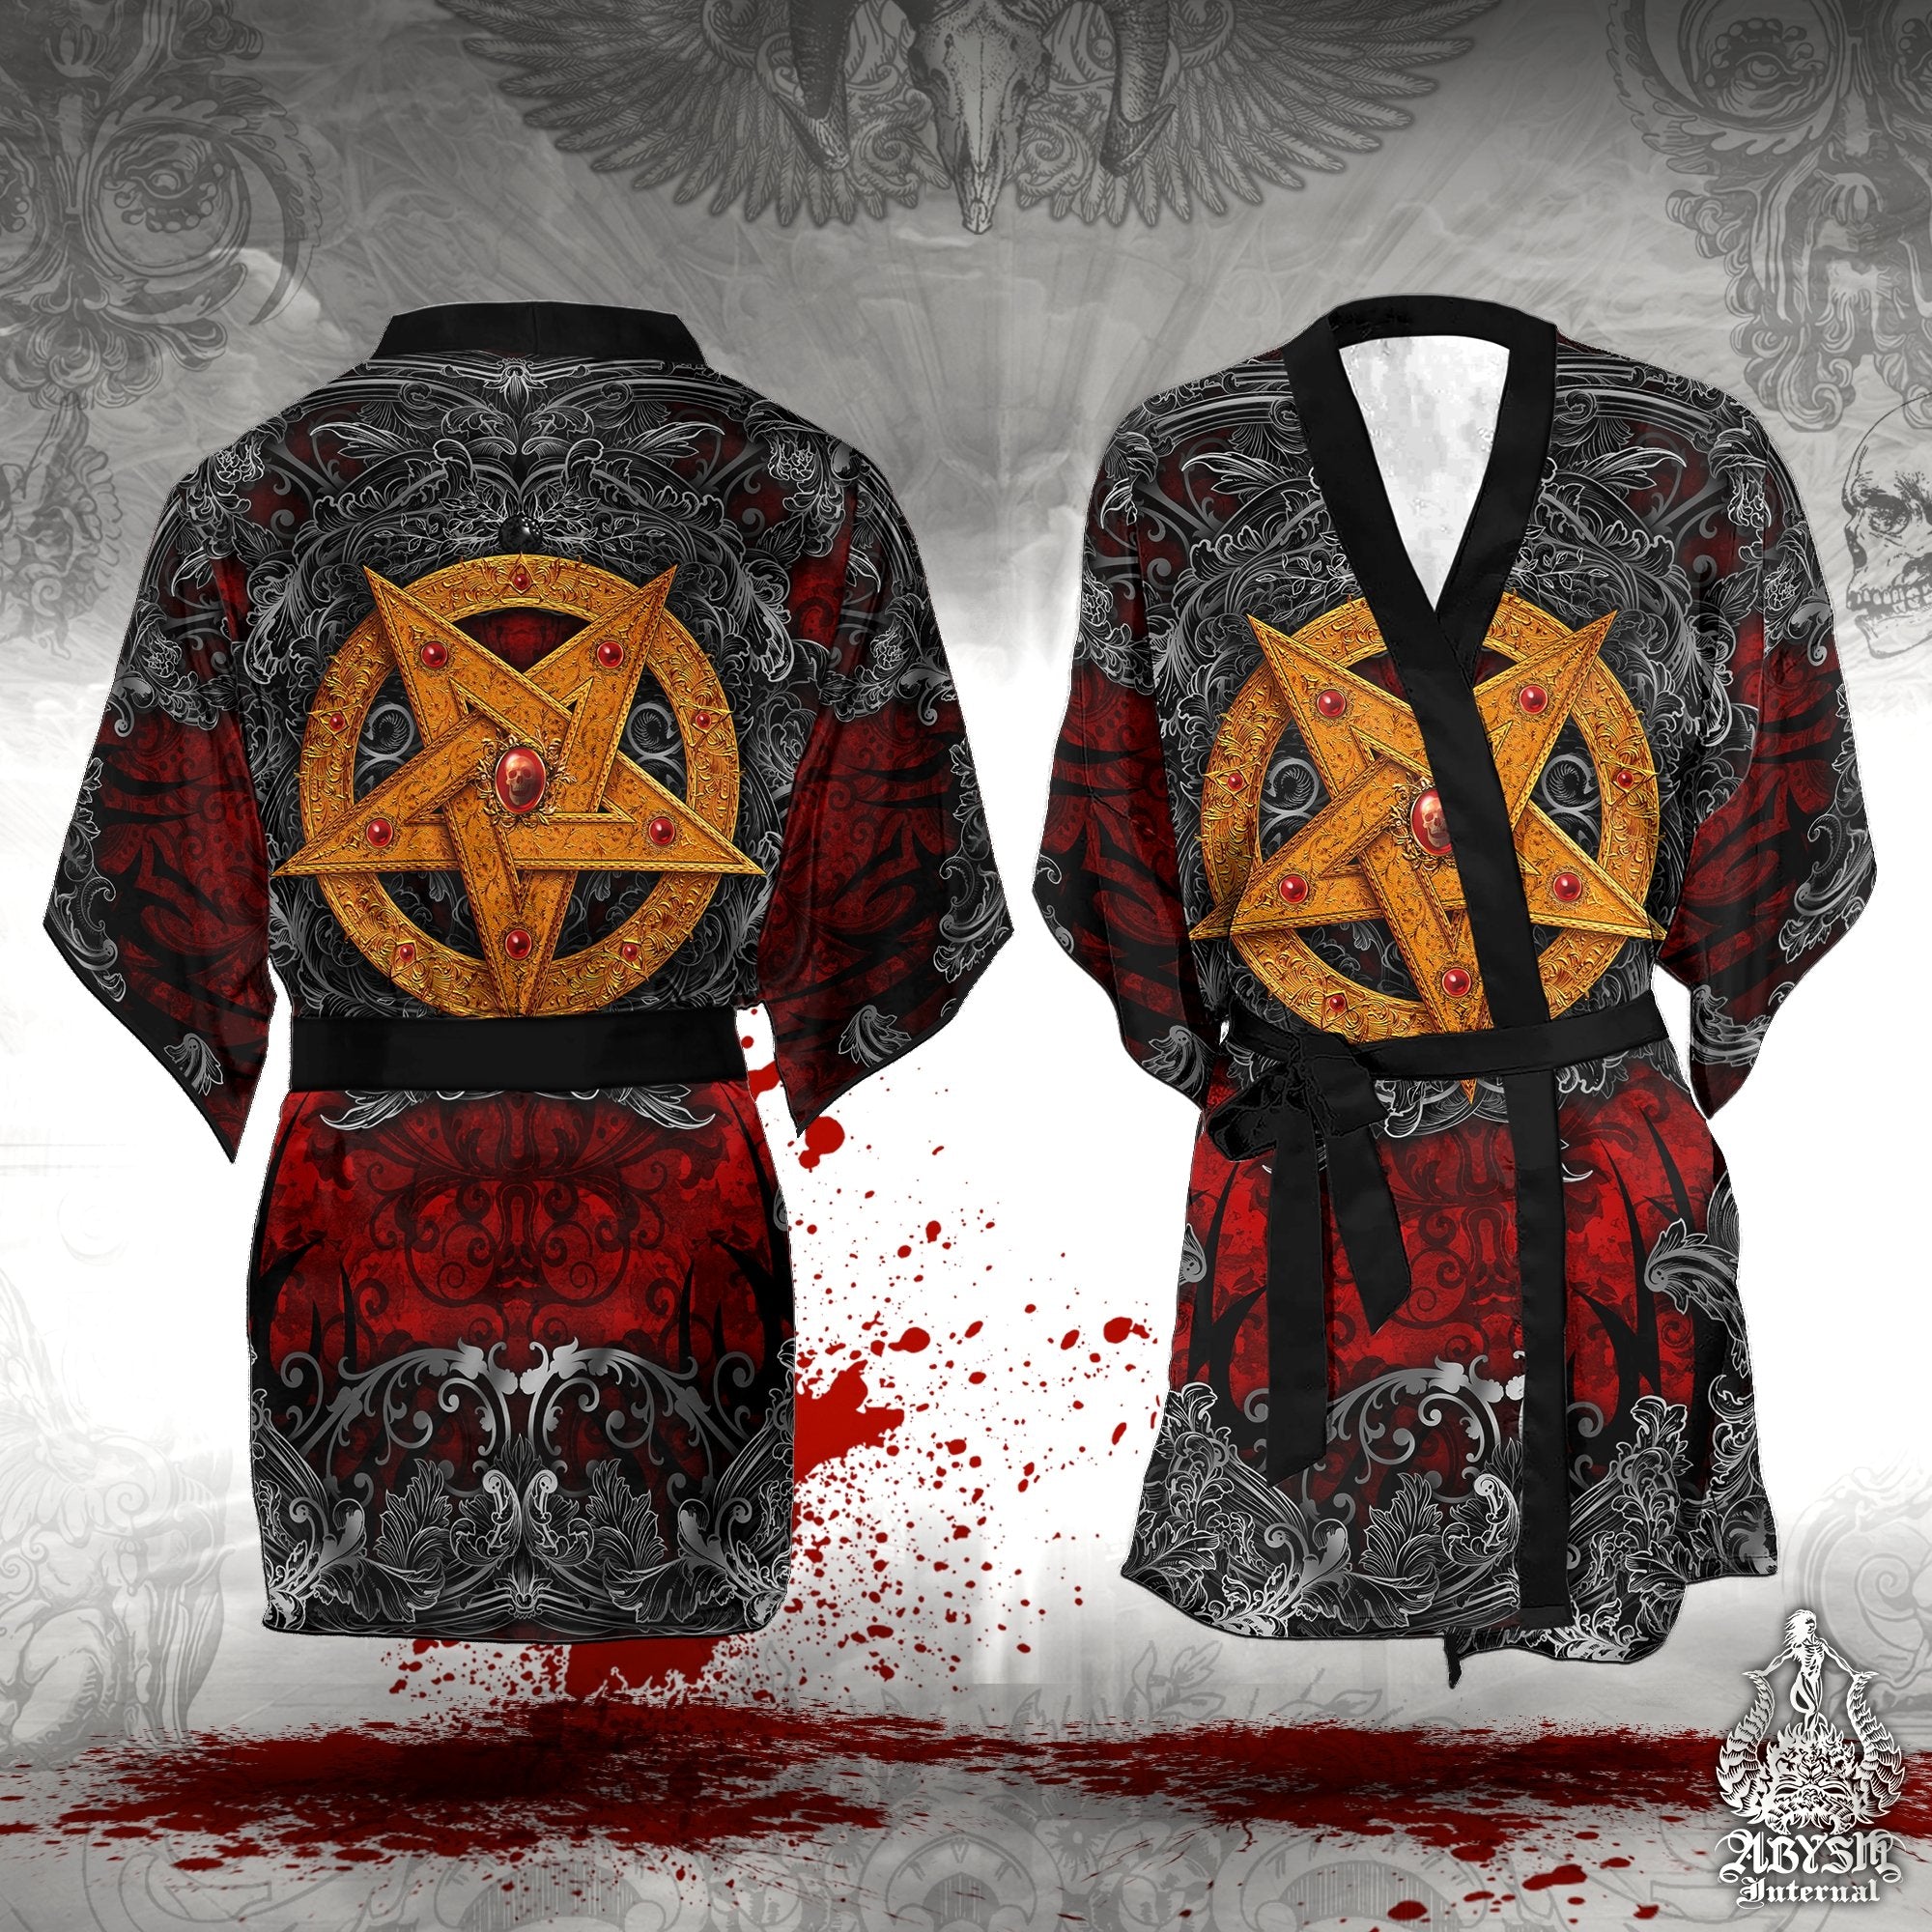 Pentagram Cover Up, Beach Outfit, Party Kimono, Metal Summer Festival Robe, Satanic Gothic Indie and Alternative Clothing, Unisex - Gold Red - Abysm Internal